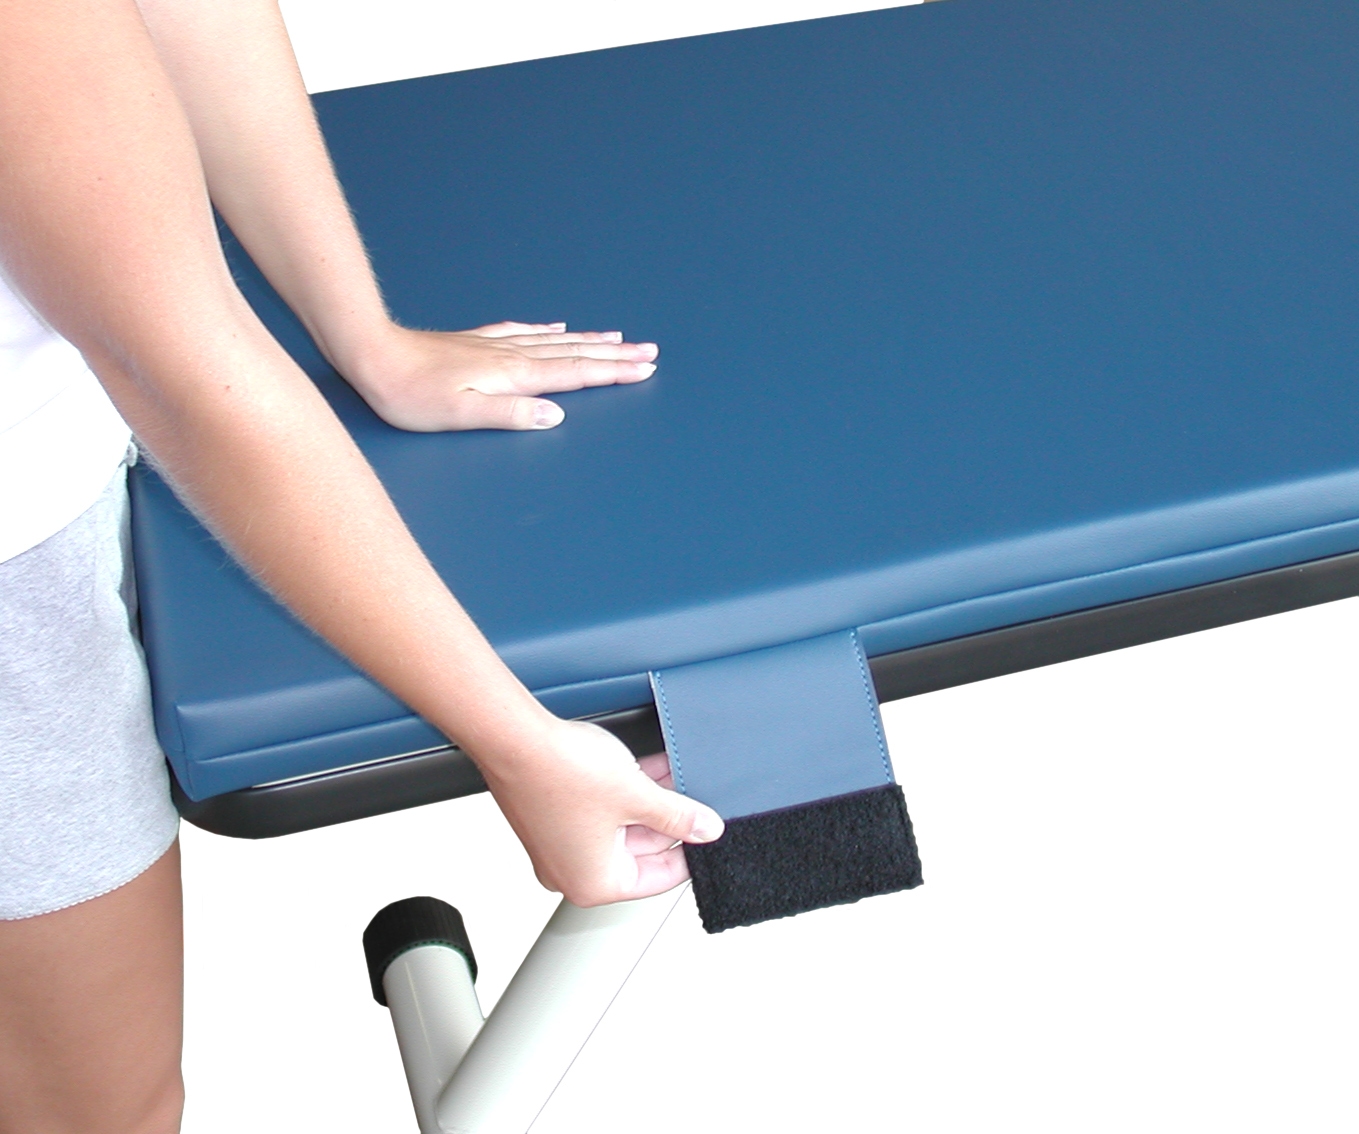 Tri W-G Removable Mat for Therapy Trainer Table